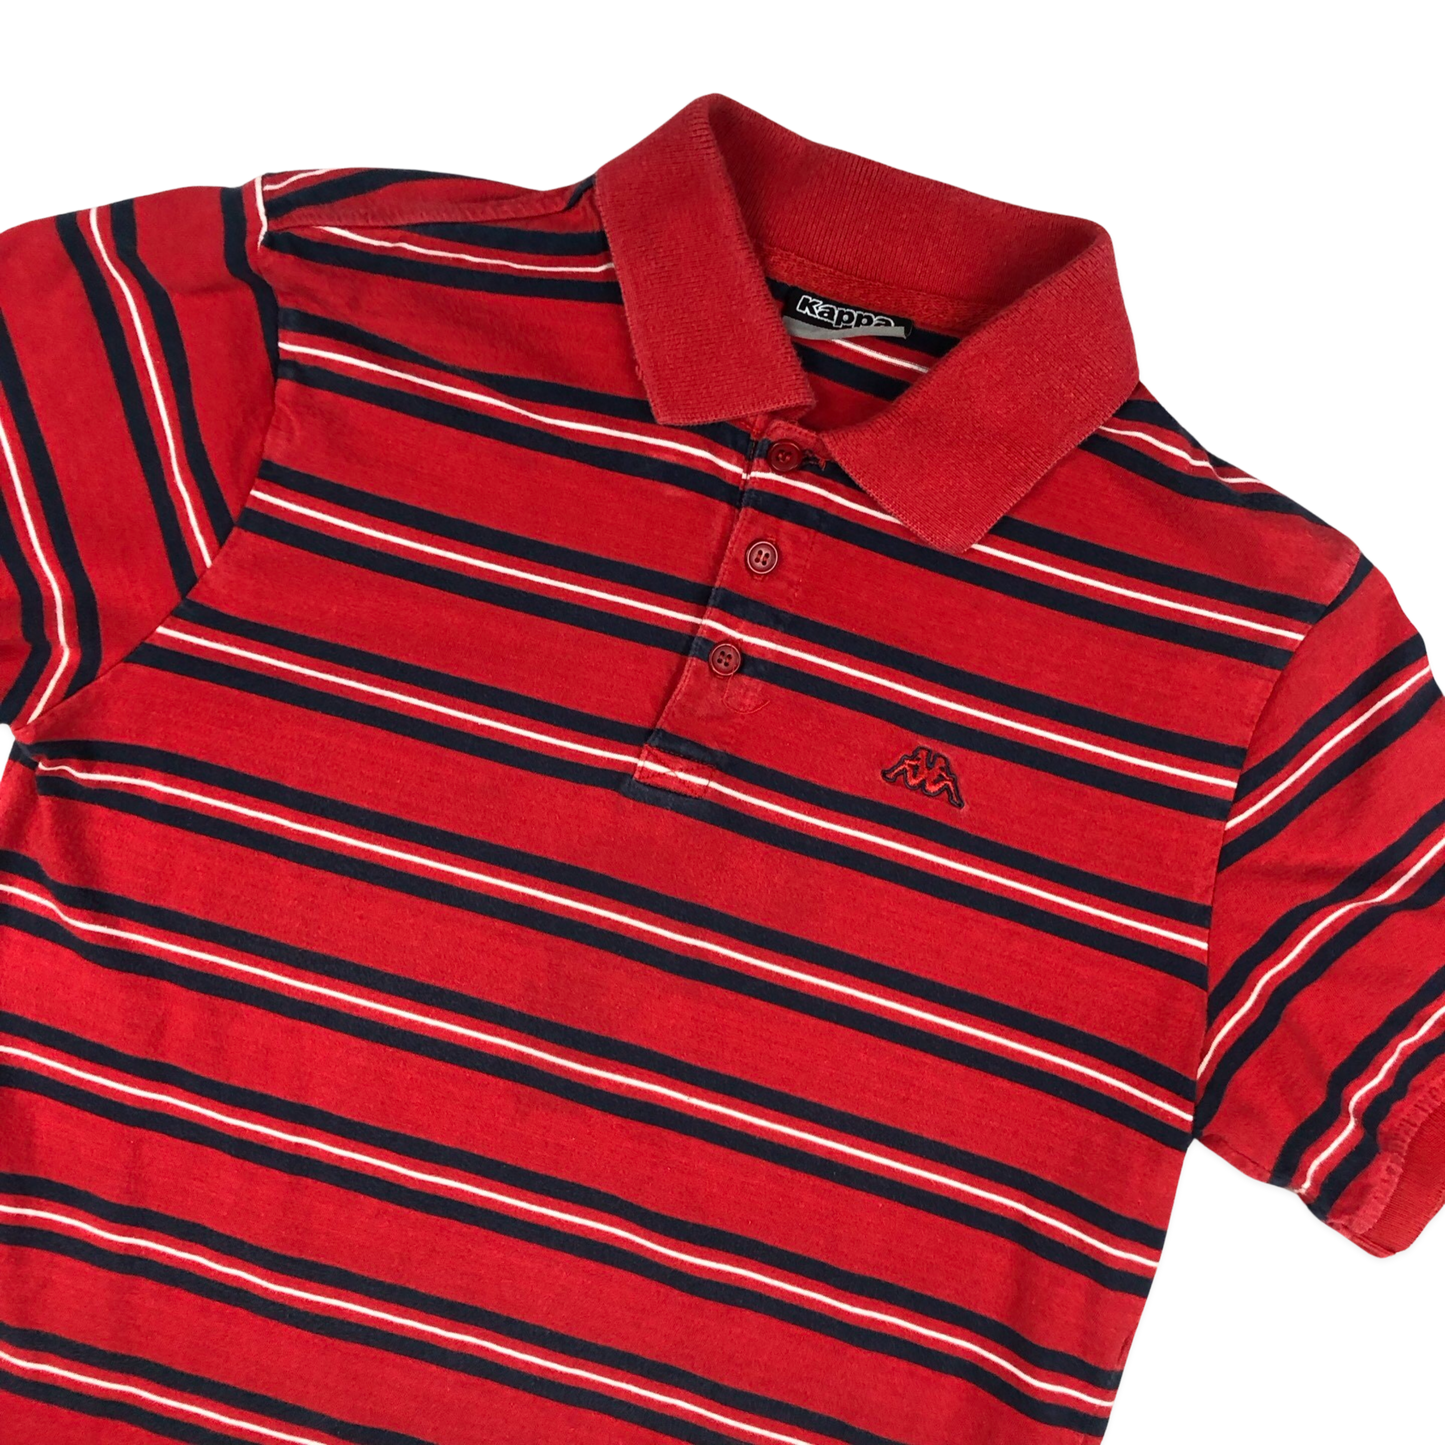 Vintage Kappa Striped Red and Navy Polo Shirt